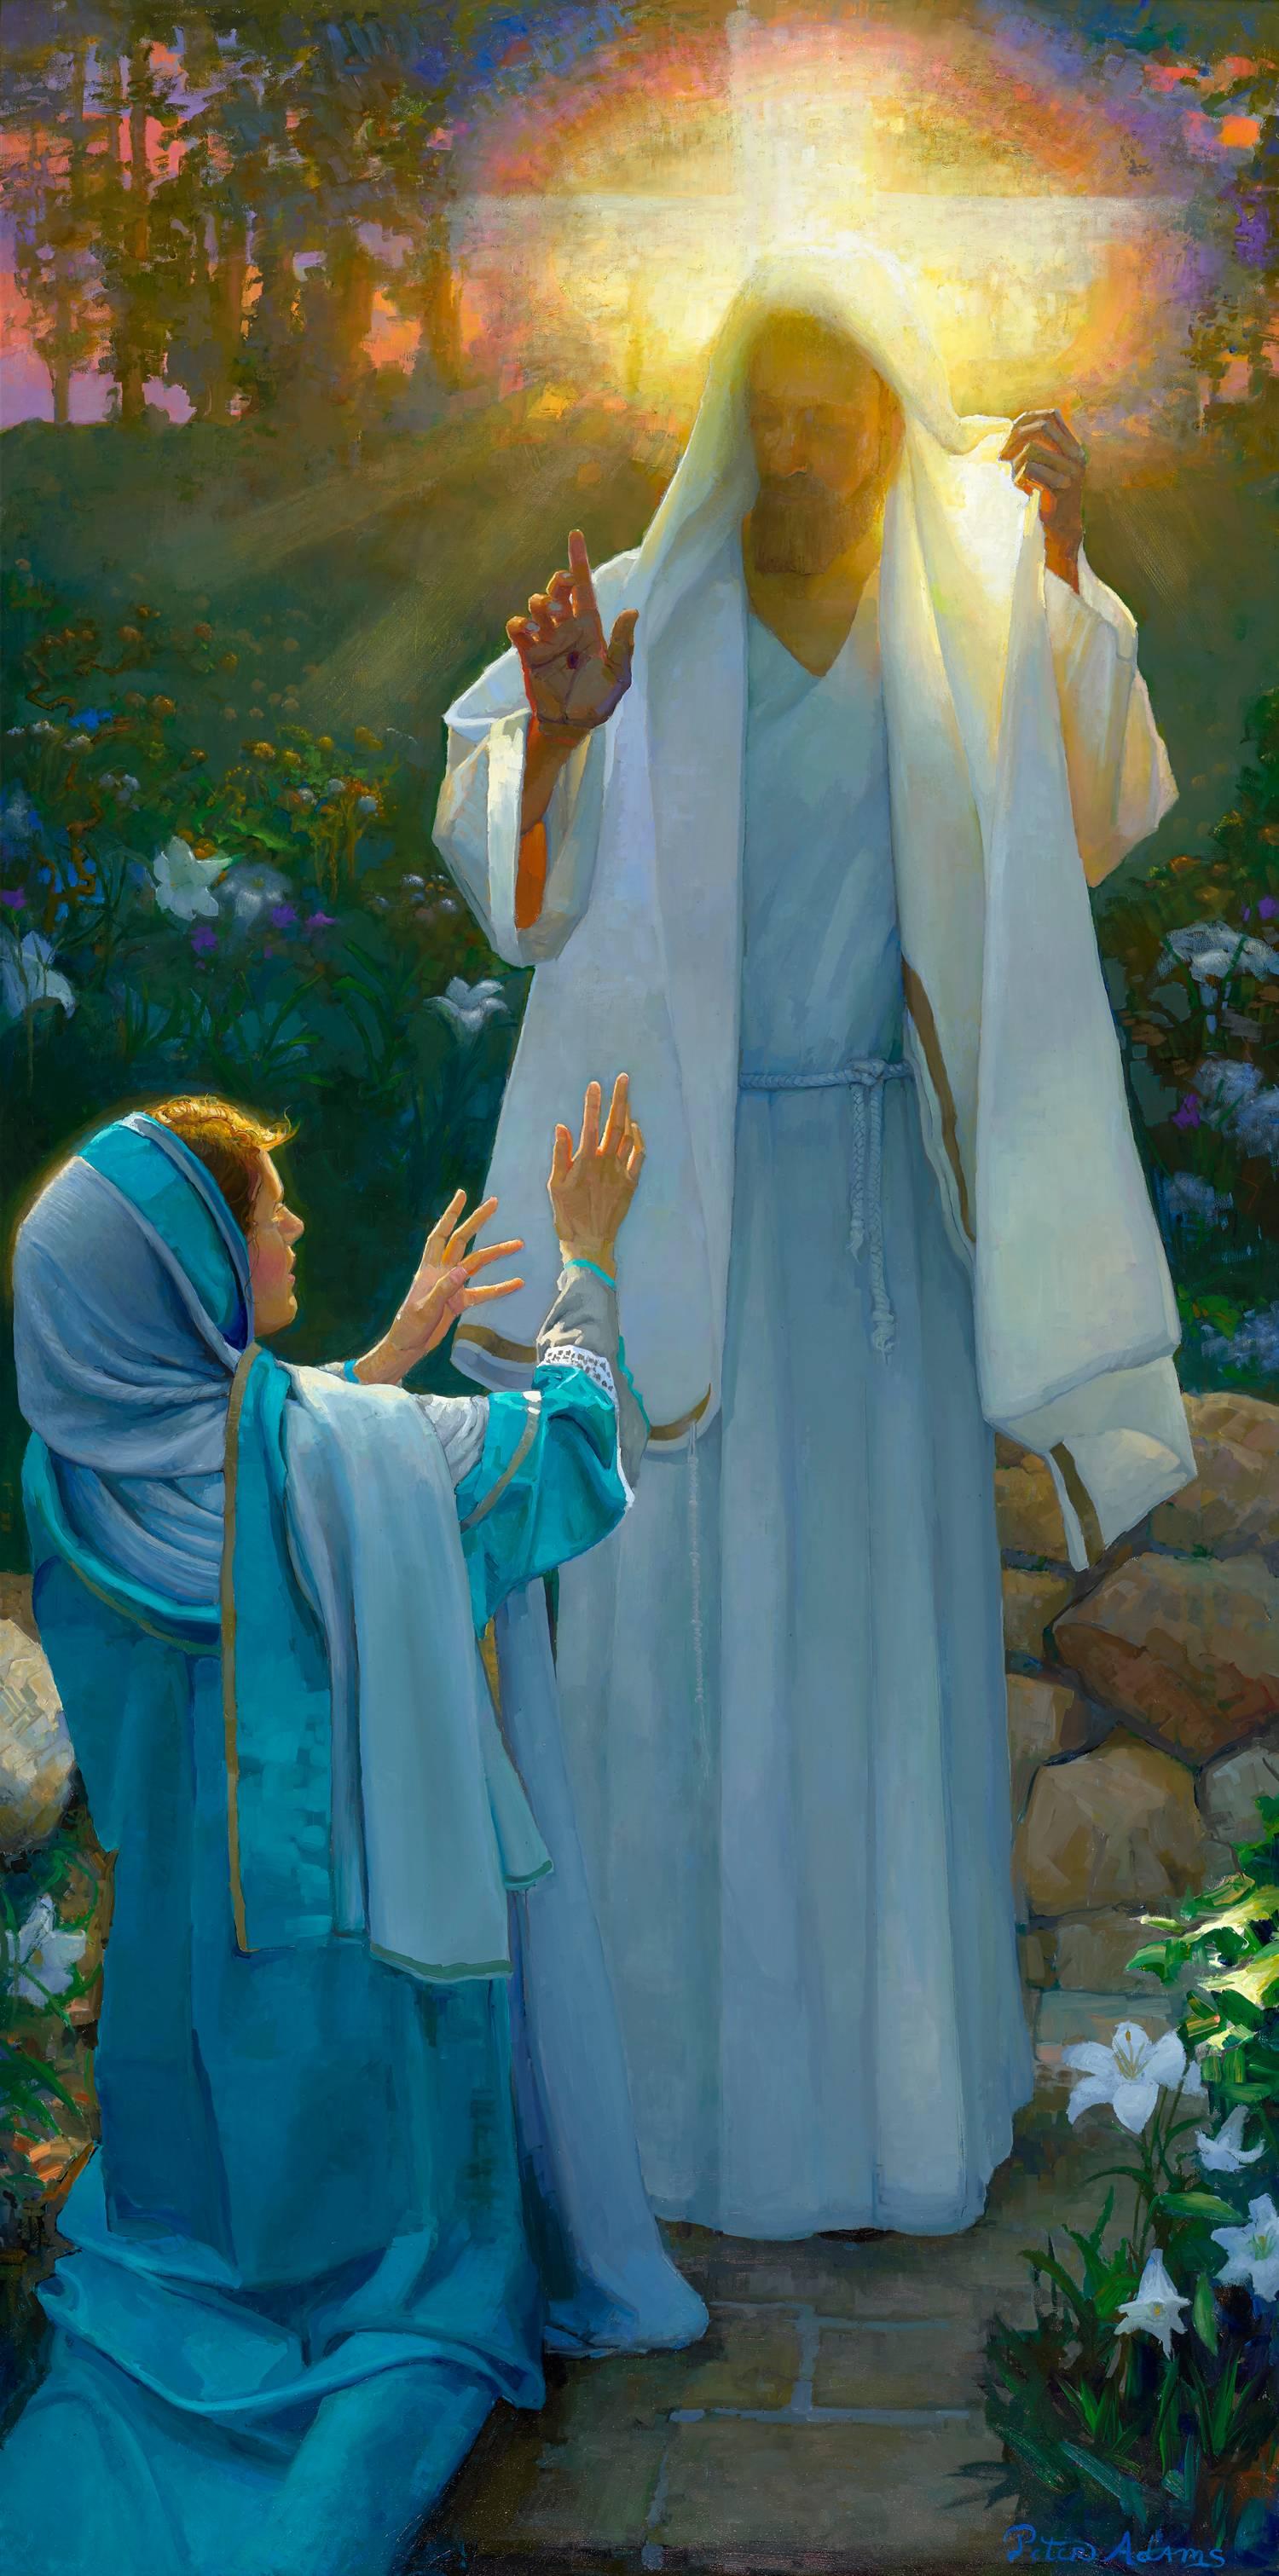 The Resurrection - Painting by Peter Adams